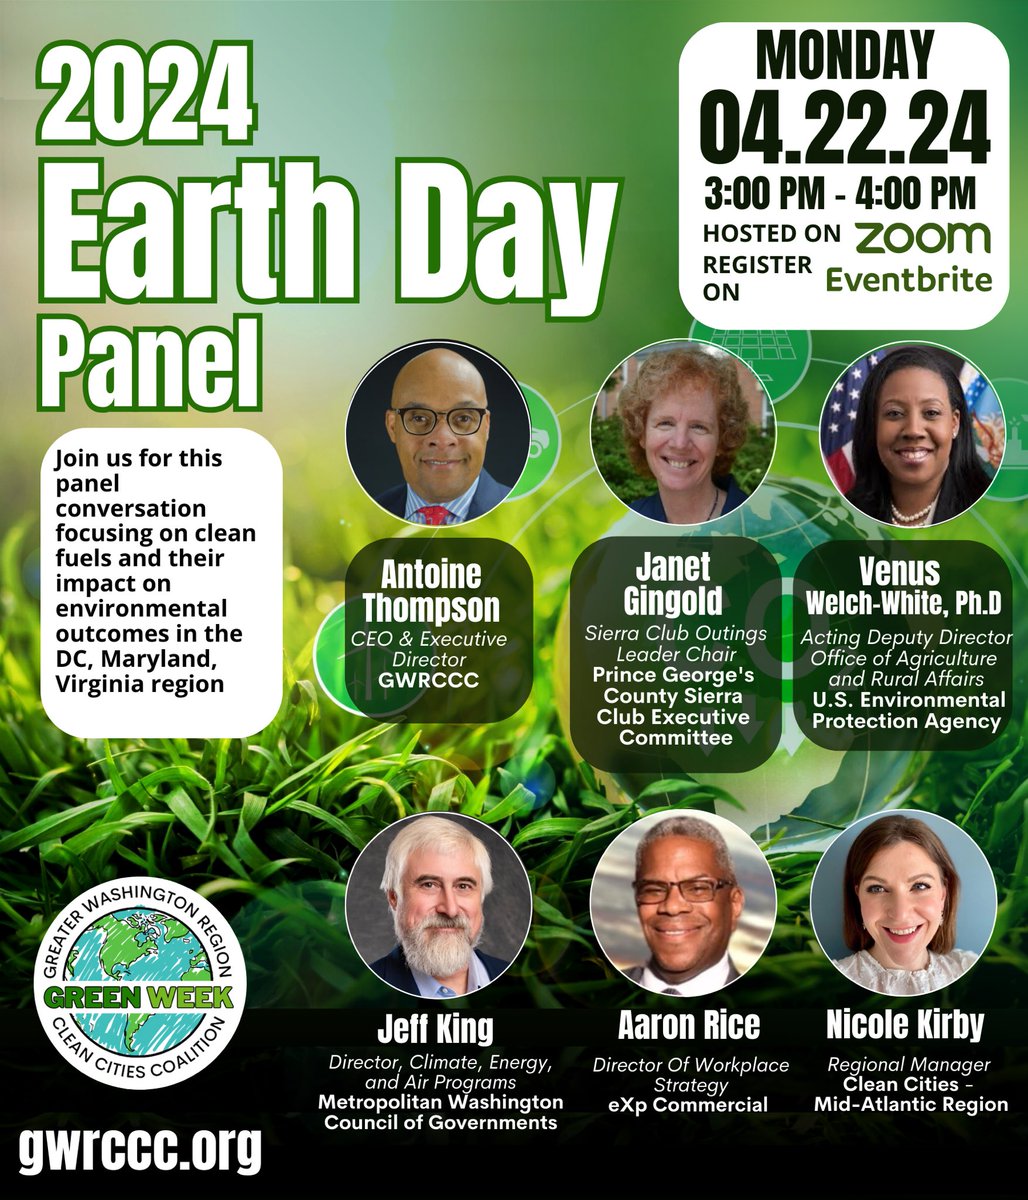 #earthday🌎 #earthday #cleancities Greater Washington Region Clean Cities Coalition GWRCCC 2024gwrcccearthdaypanel.eventbrite.com @GWRCCC